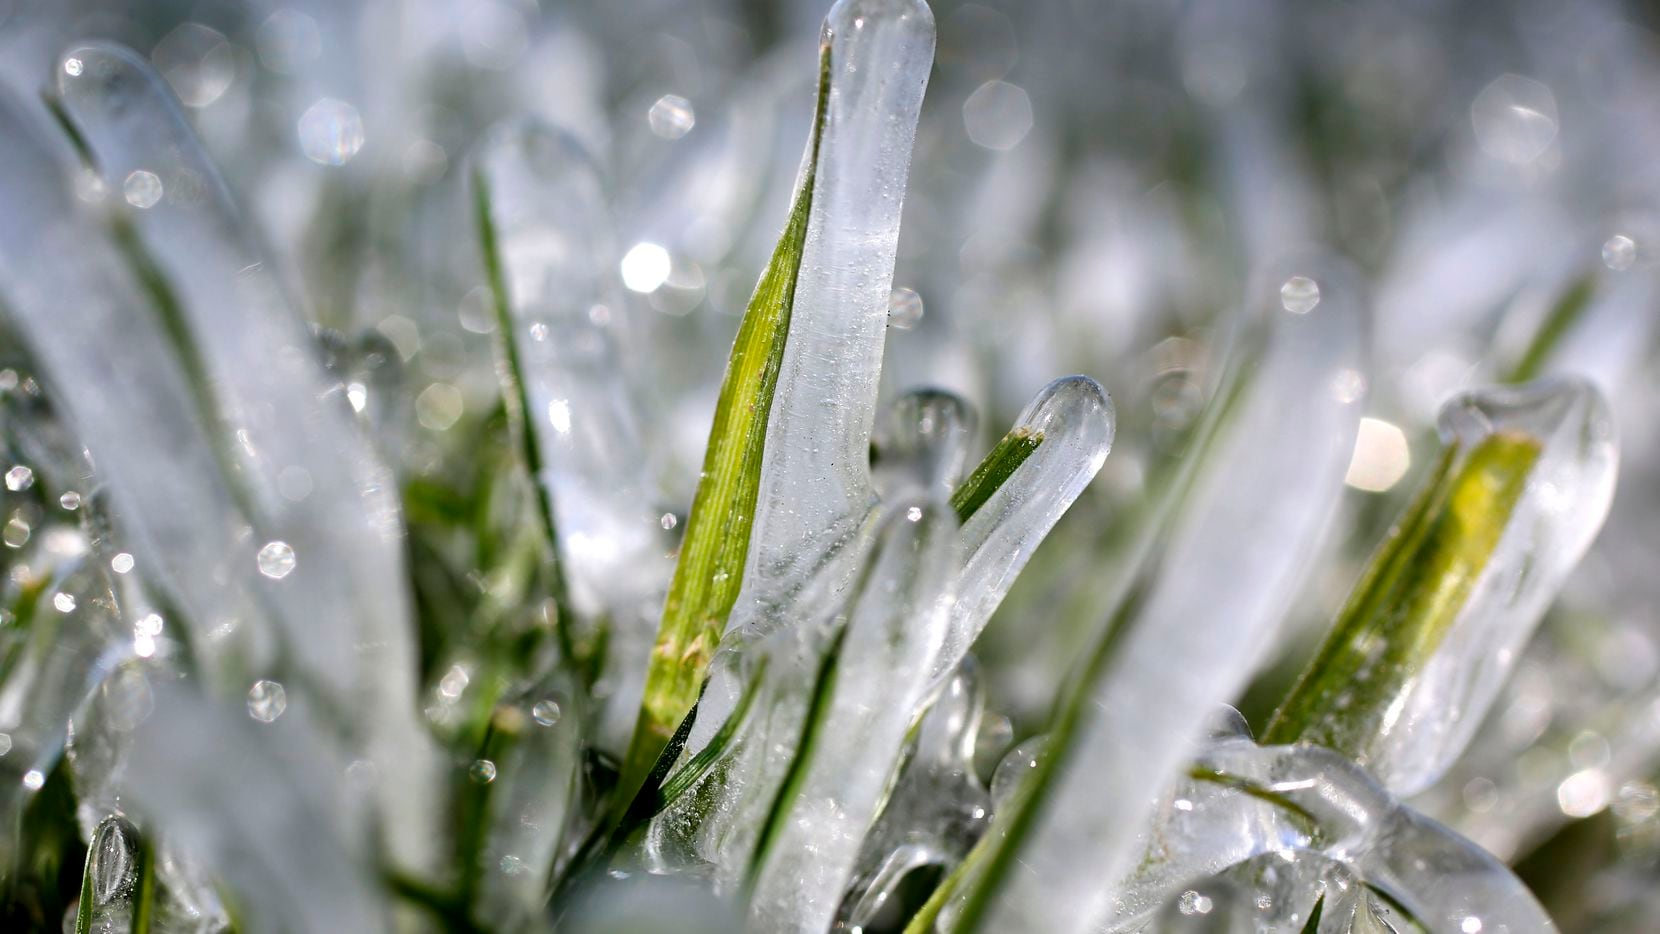 Ice covers grass from a sprinkler system along Abrams Road in East Dallas on Tuesday, March 5, 2019. In Dallas, temperatures dipped to 21 degrees, the lowest temperature of the year. (Rose Baca/Staff Photographer)